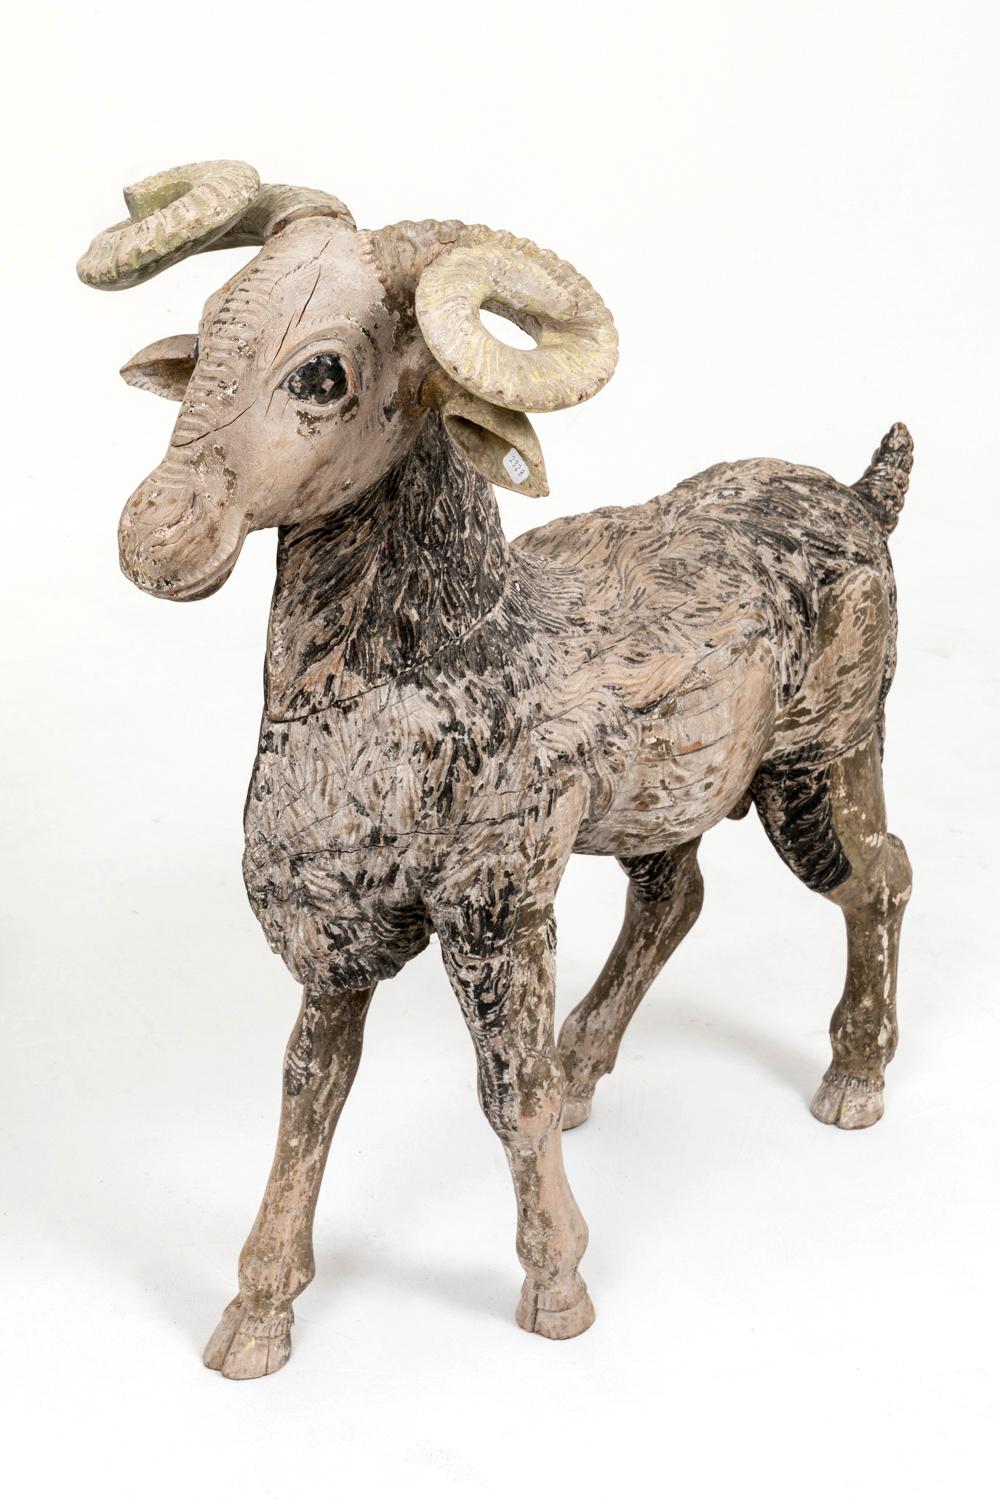 Ram in sculpted and painted wood, in grey color with lighter wounded horns.

Work from the 19th century.

Wear consistent with age and use.

Can be paired with an antelope.